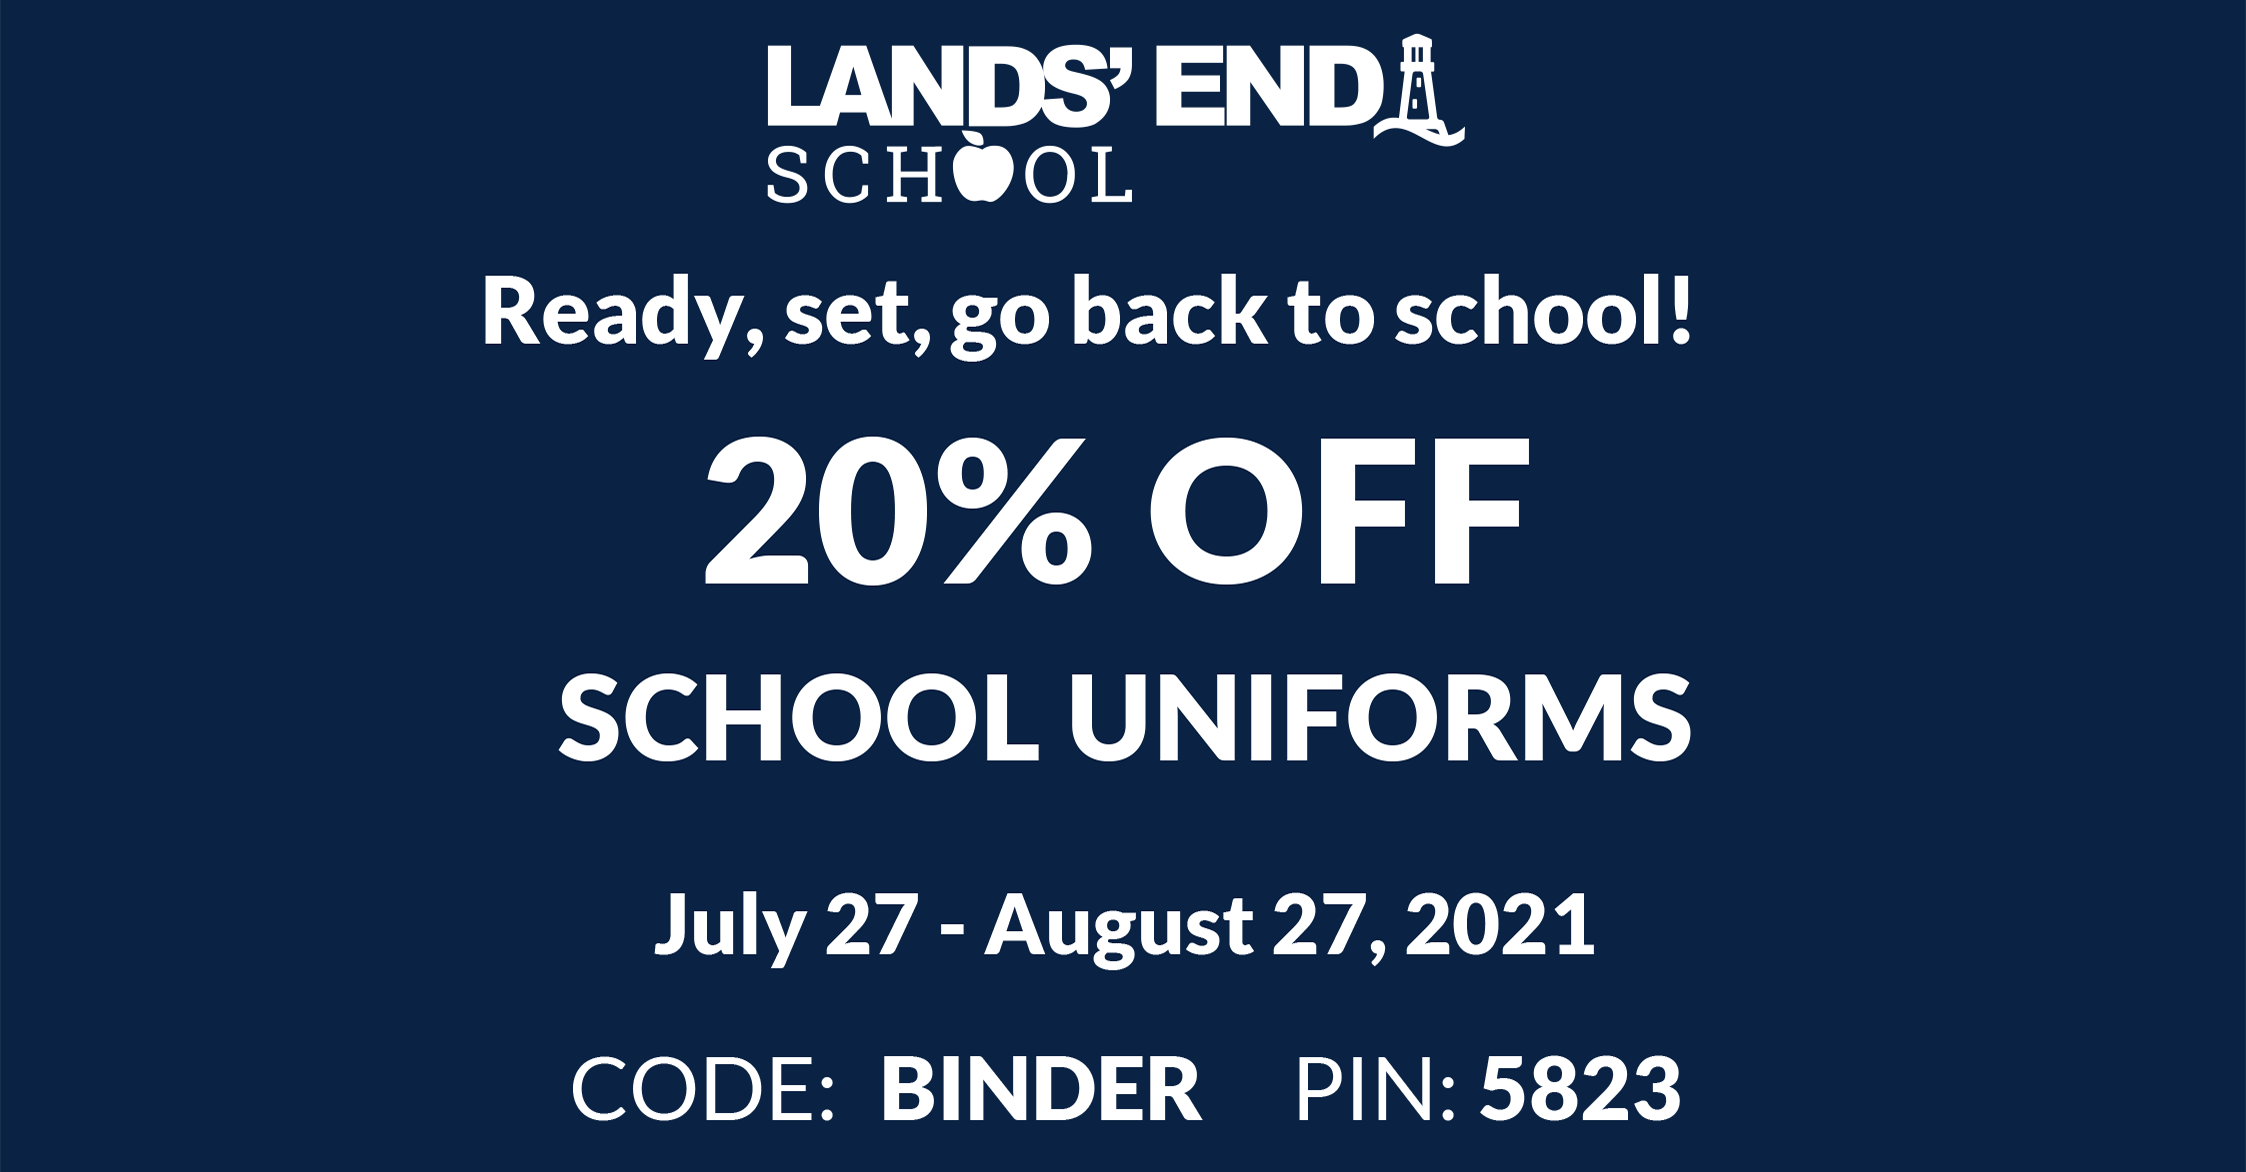 Christian Academy School System | Lands' End Uniforms | 20% OFF | July 27 - August 27